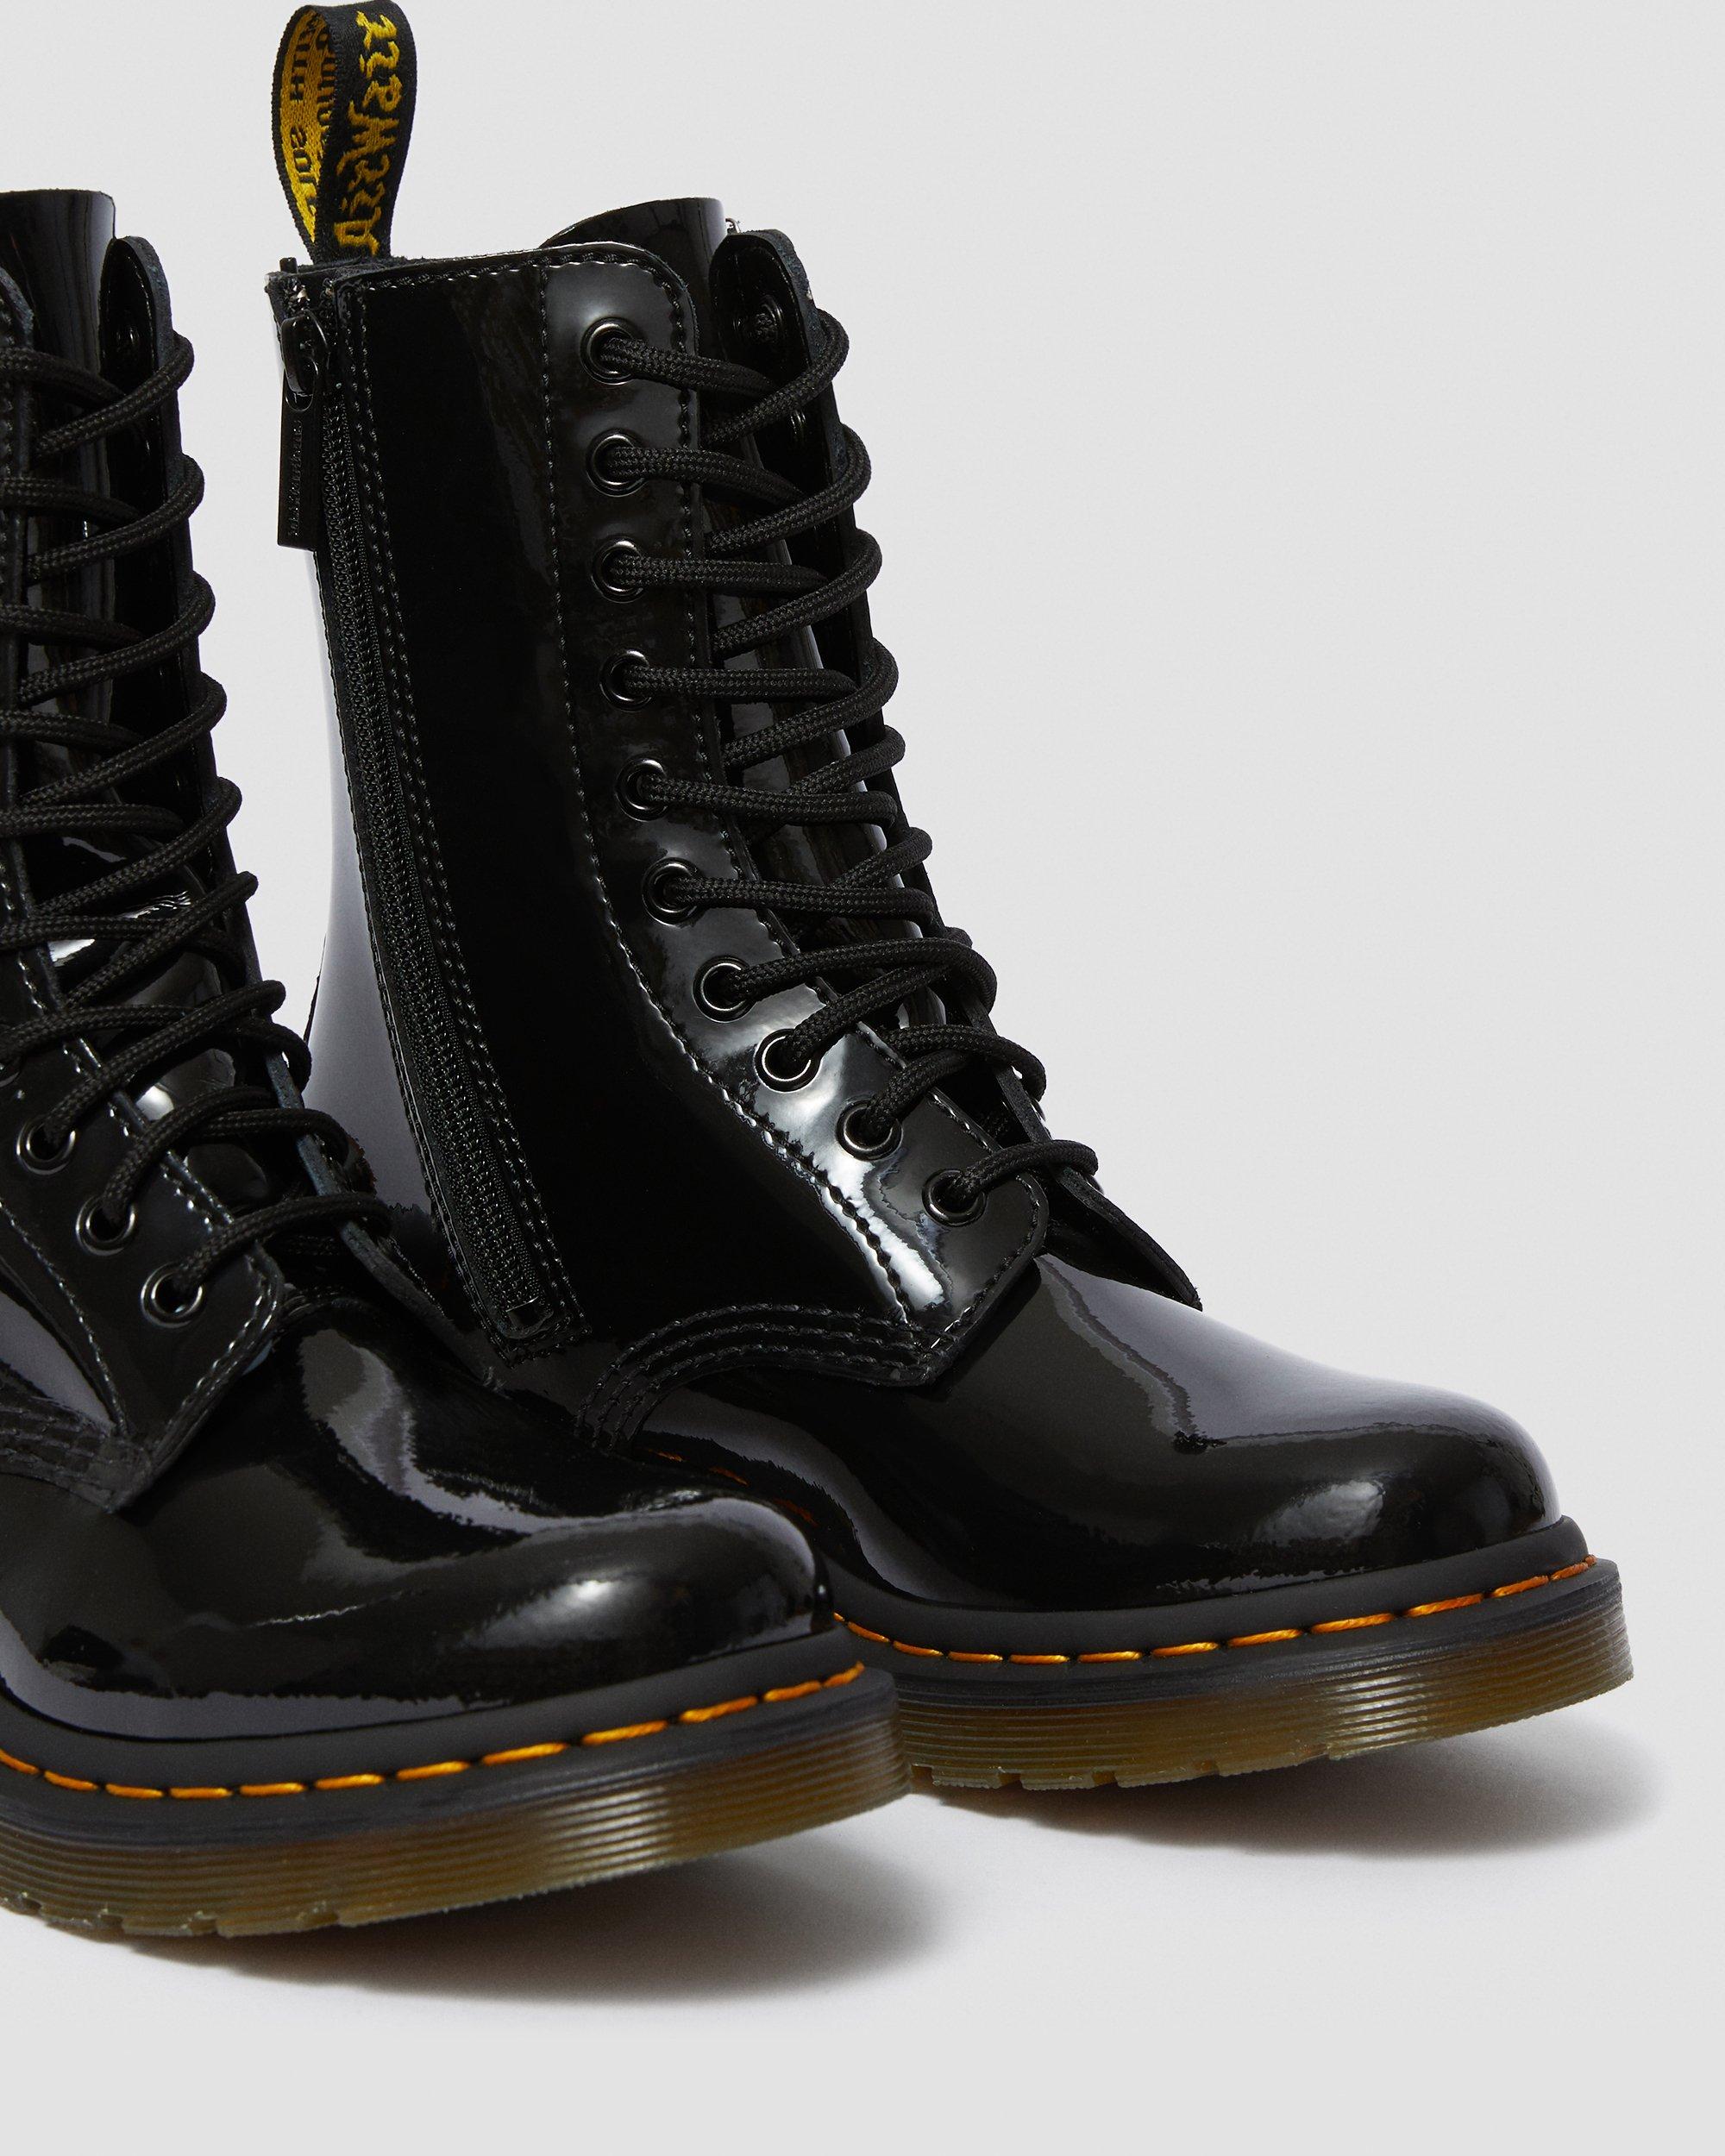 1490 Women's Patent Leather Mid Calf Boots, Black | Dr. Martens